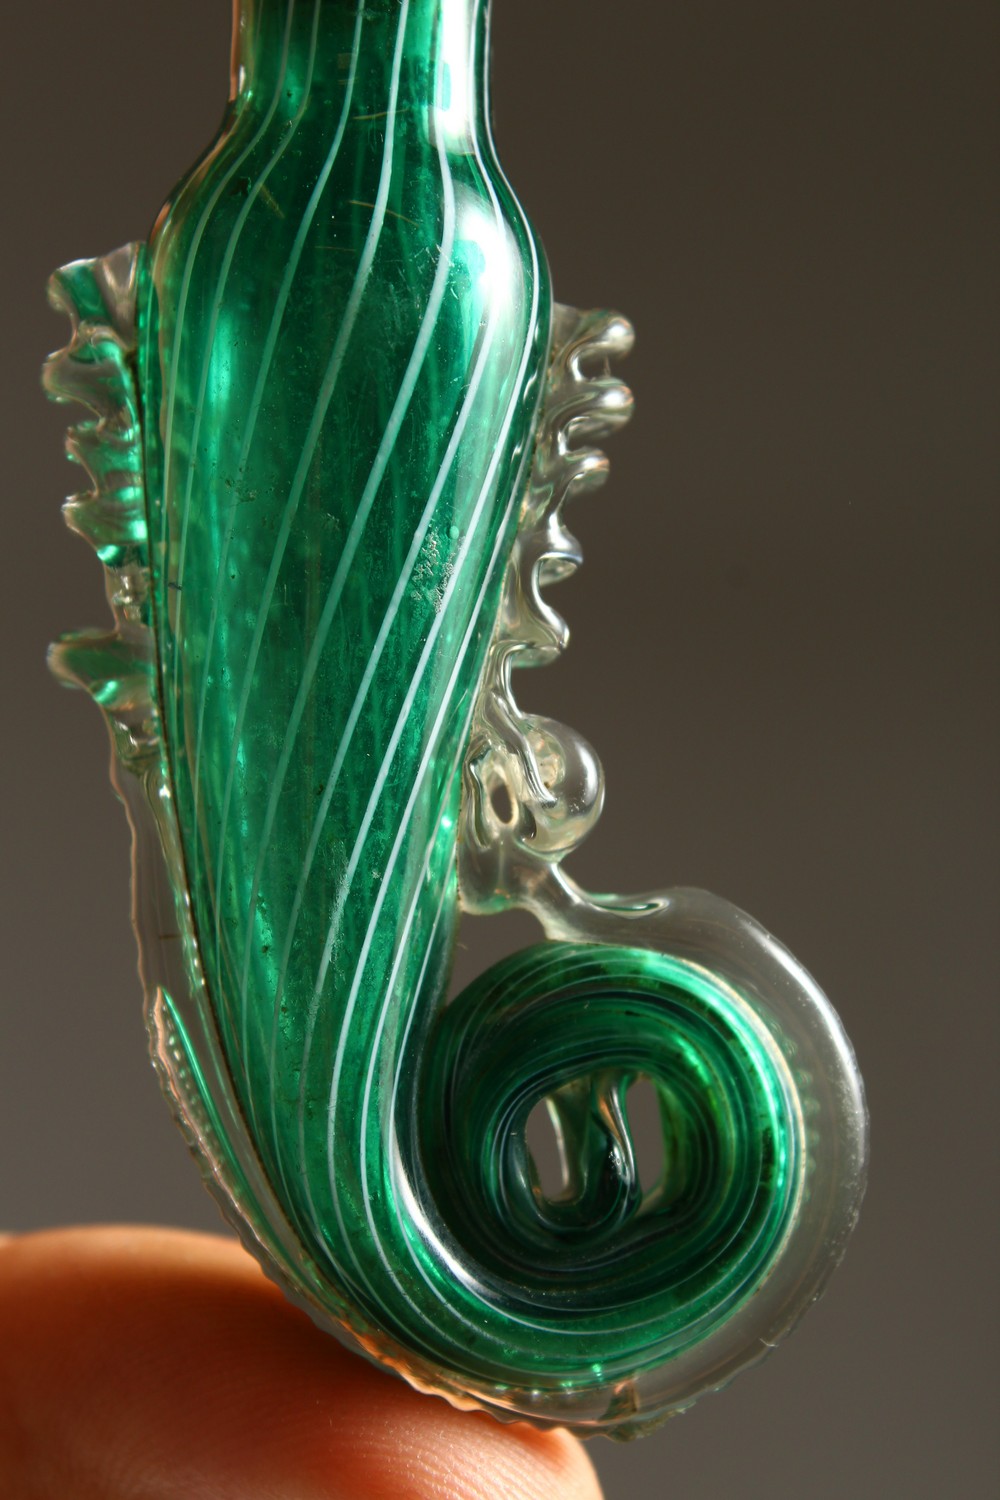 AN ITALIAN GREEN GLASS SPIRAL SHAPED SCENT BOTTLE with cork stopper. 7.5cms long. - Image 3 of 7